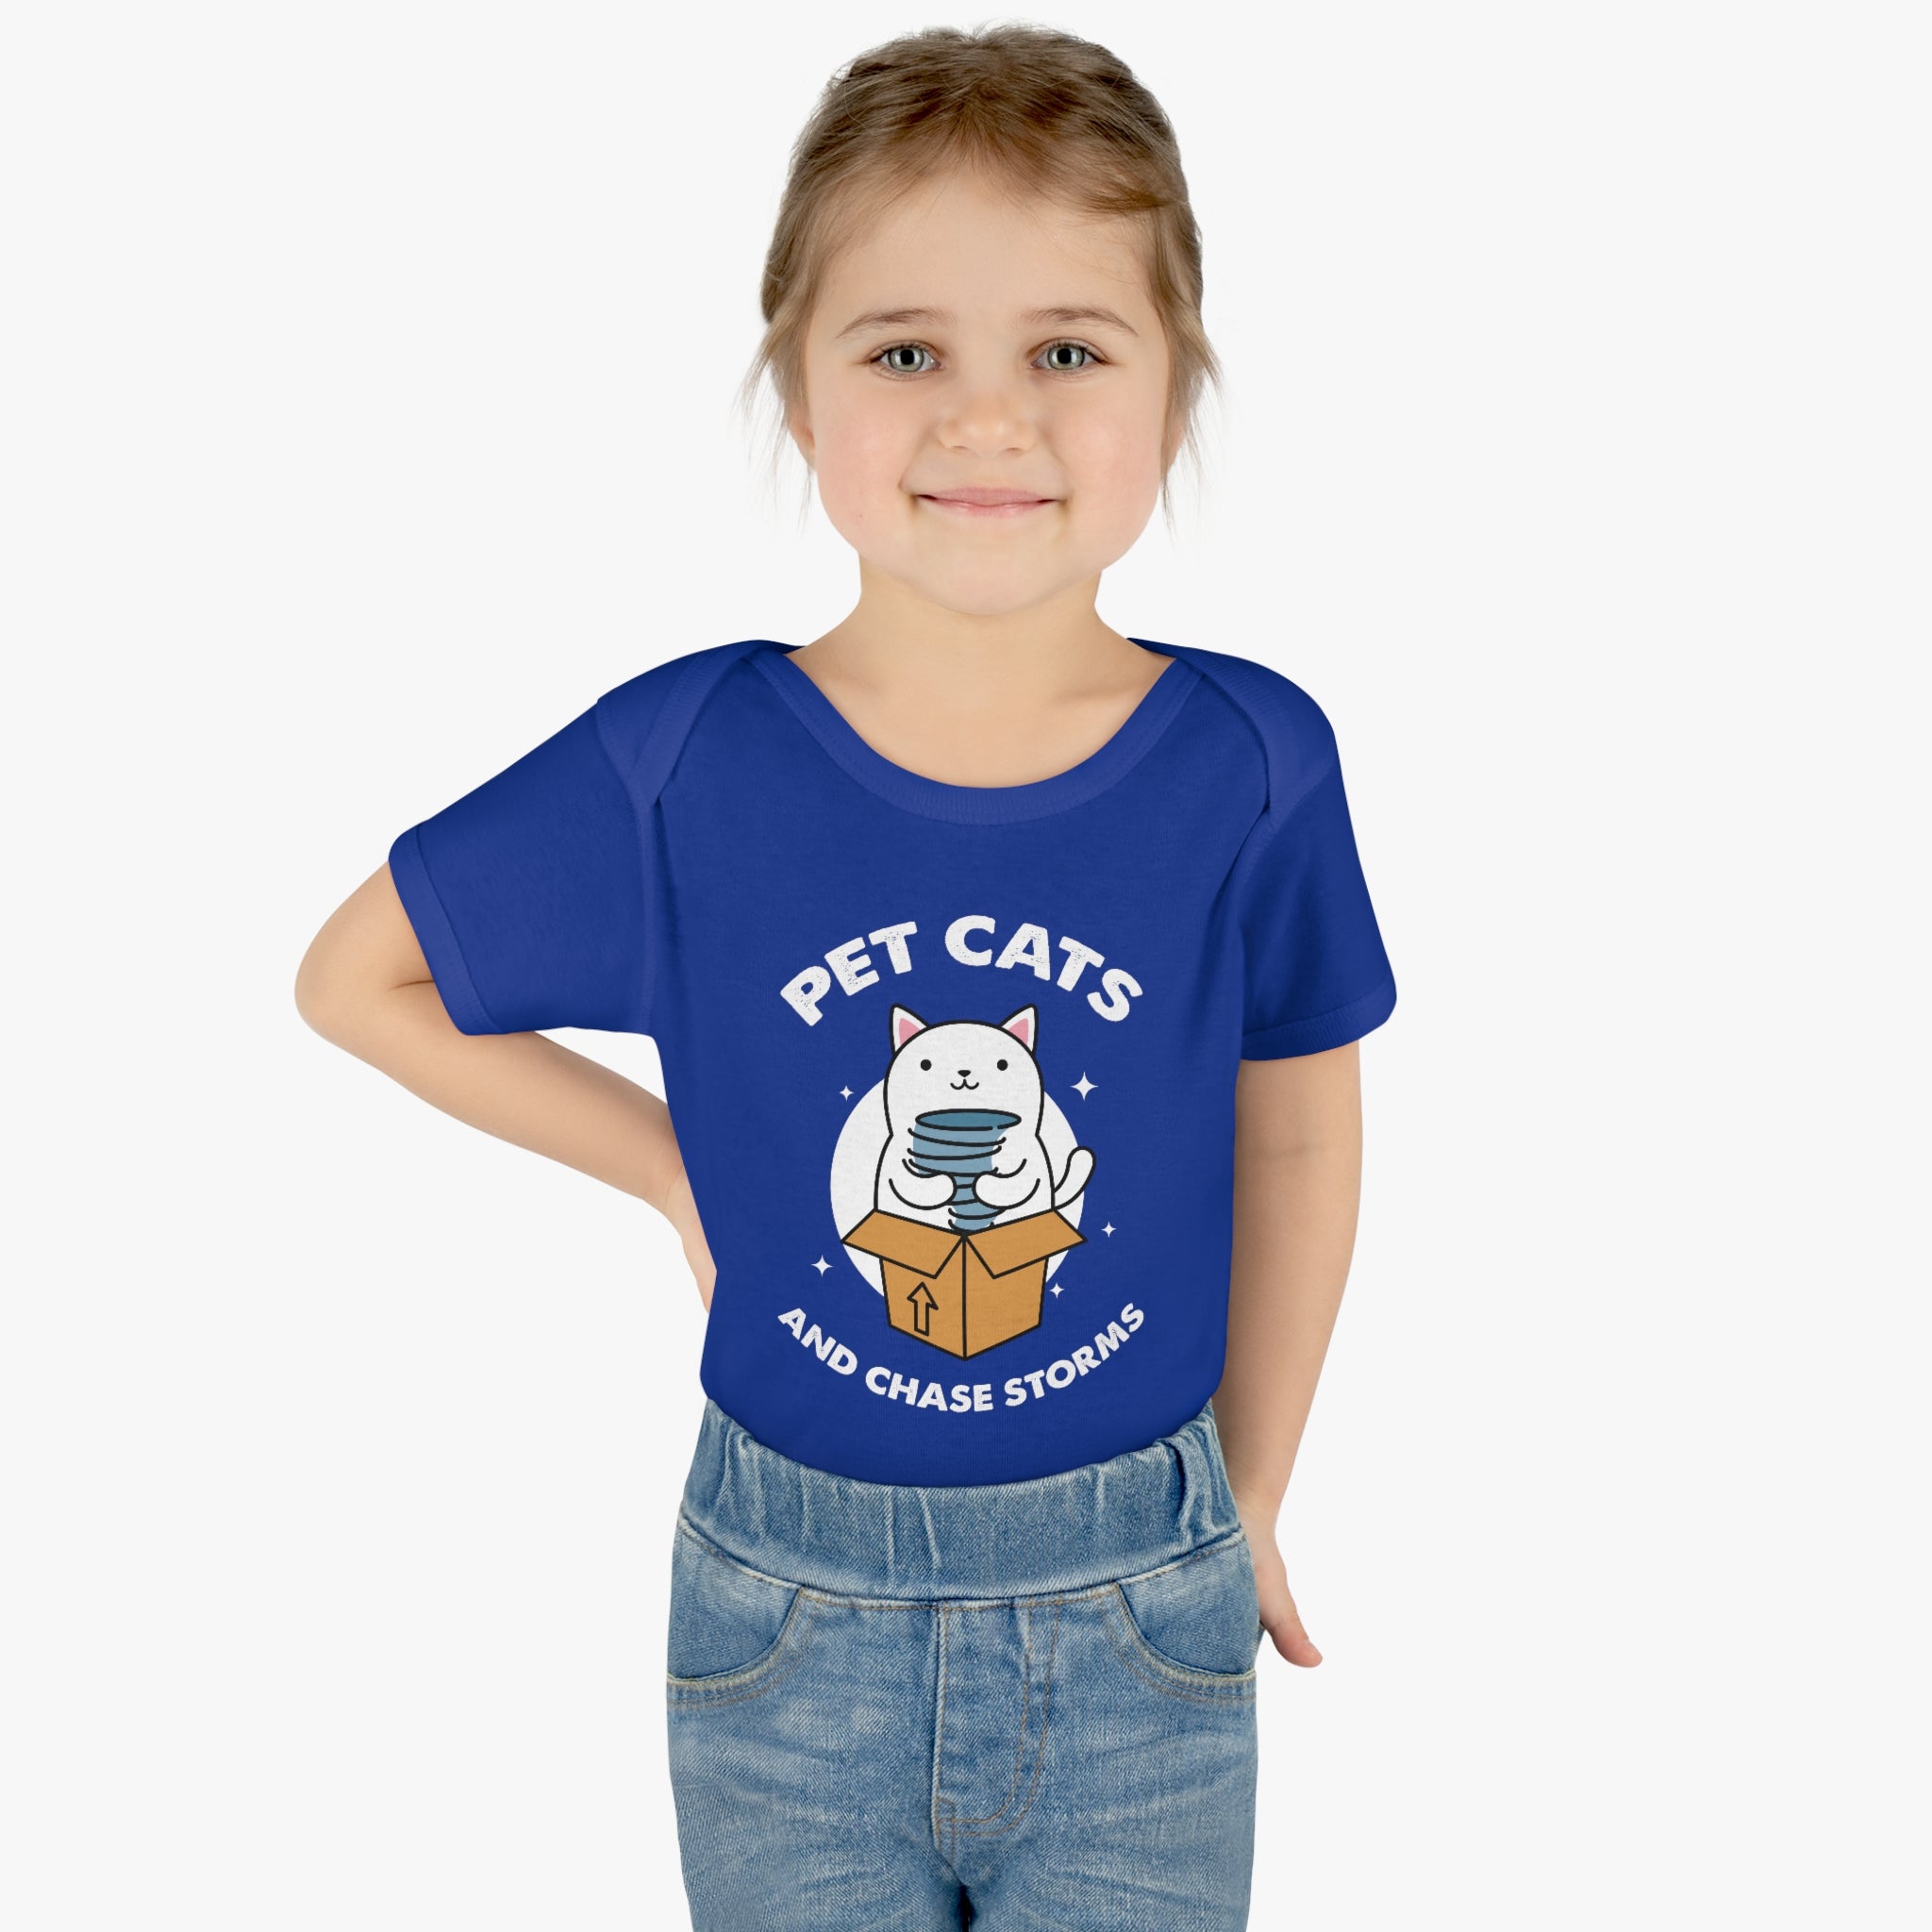 Pet Cats and Chase Storms Infant Bodysuit 